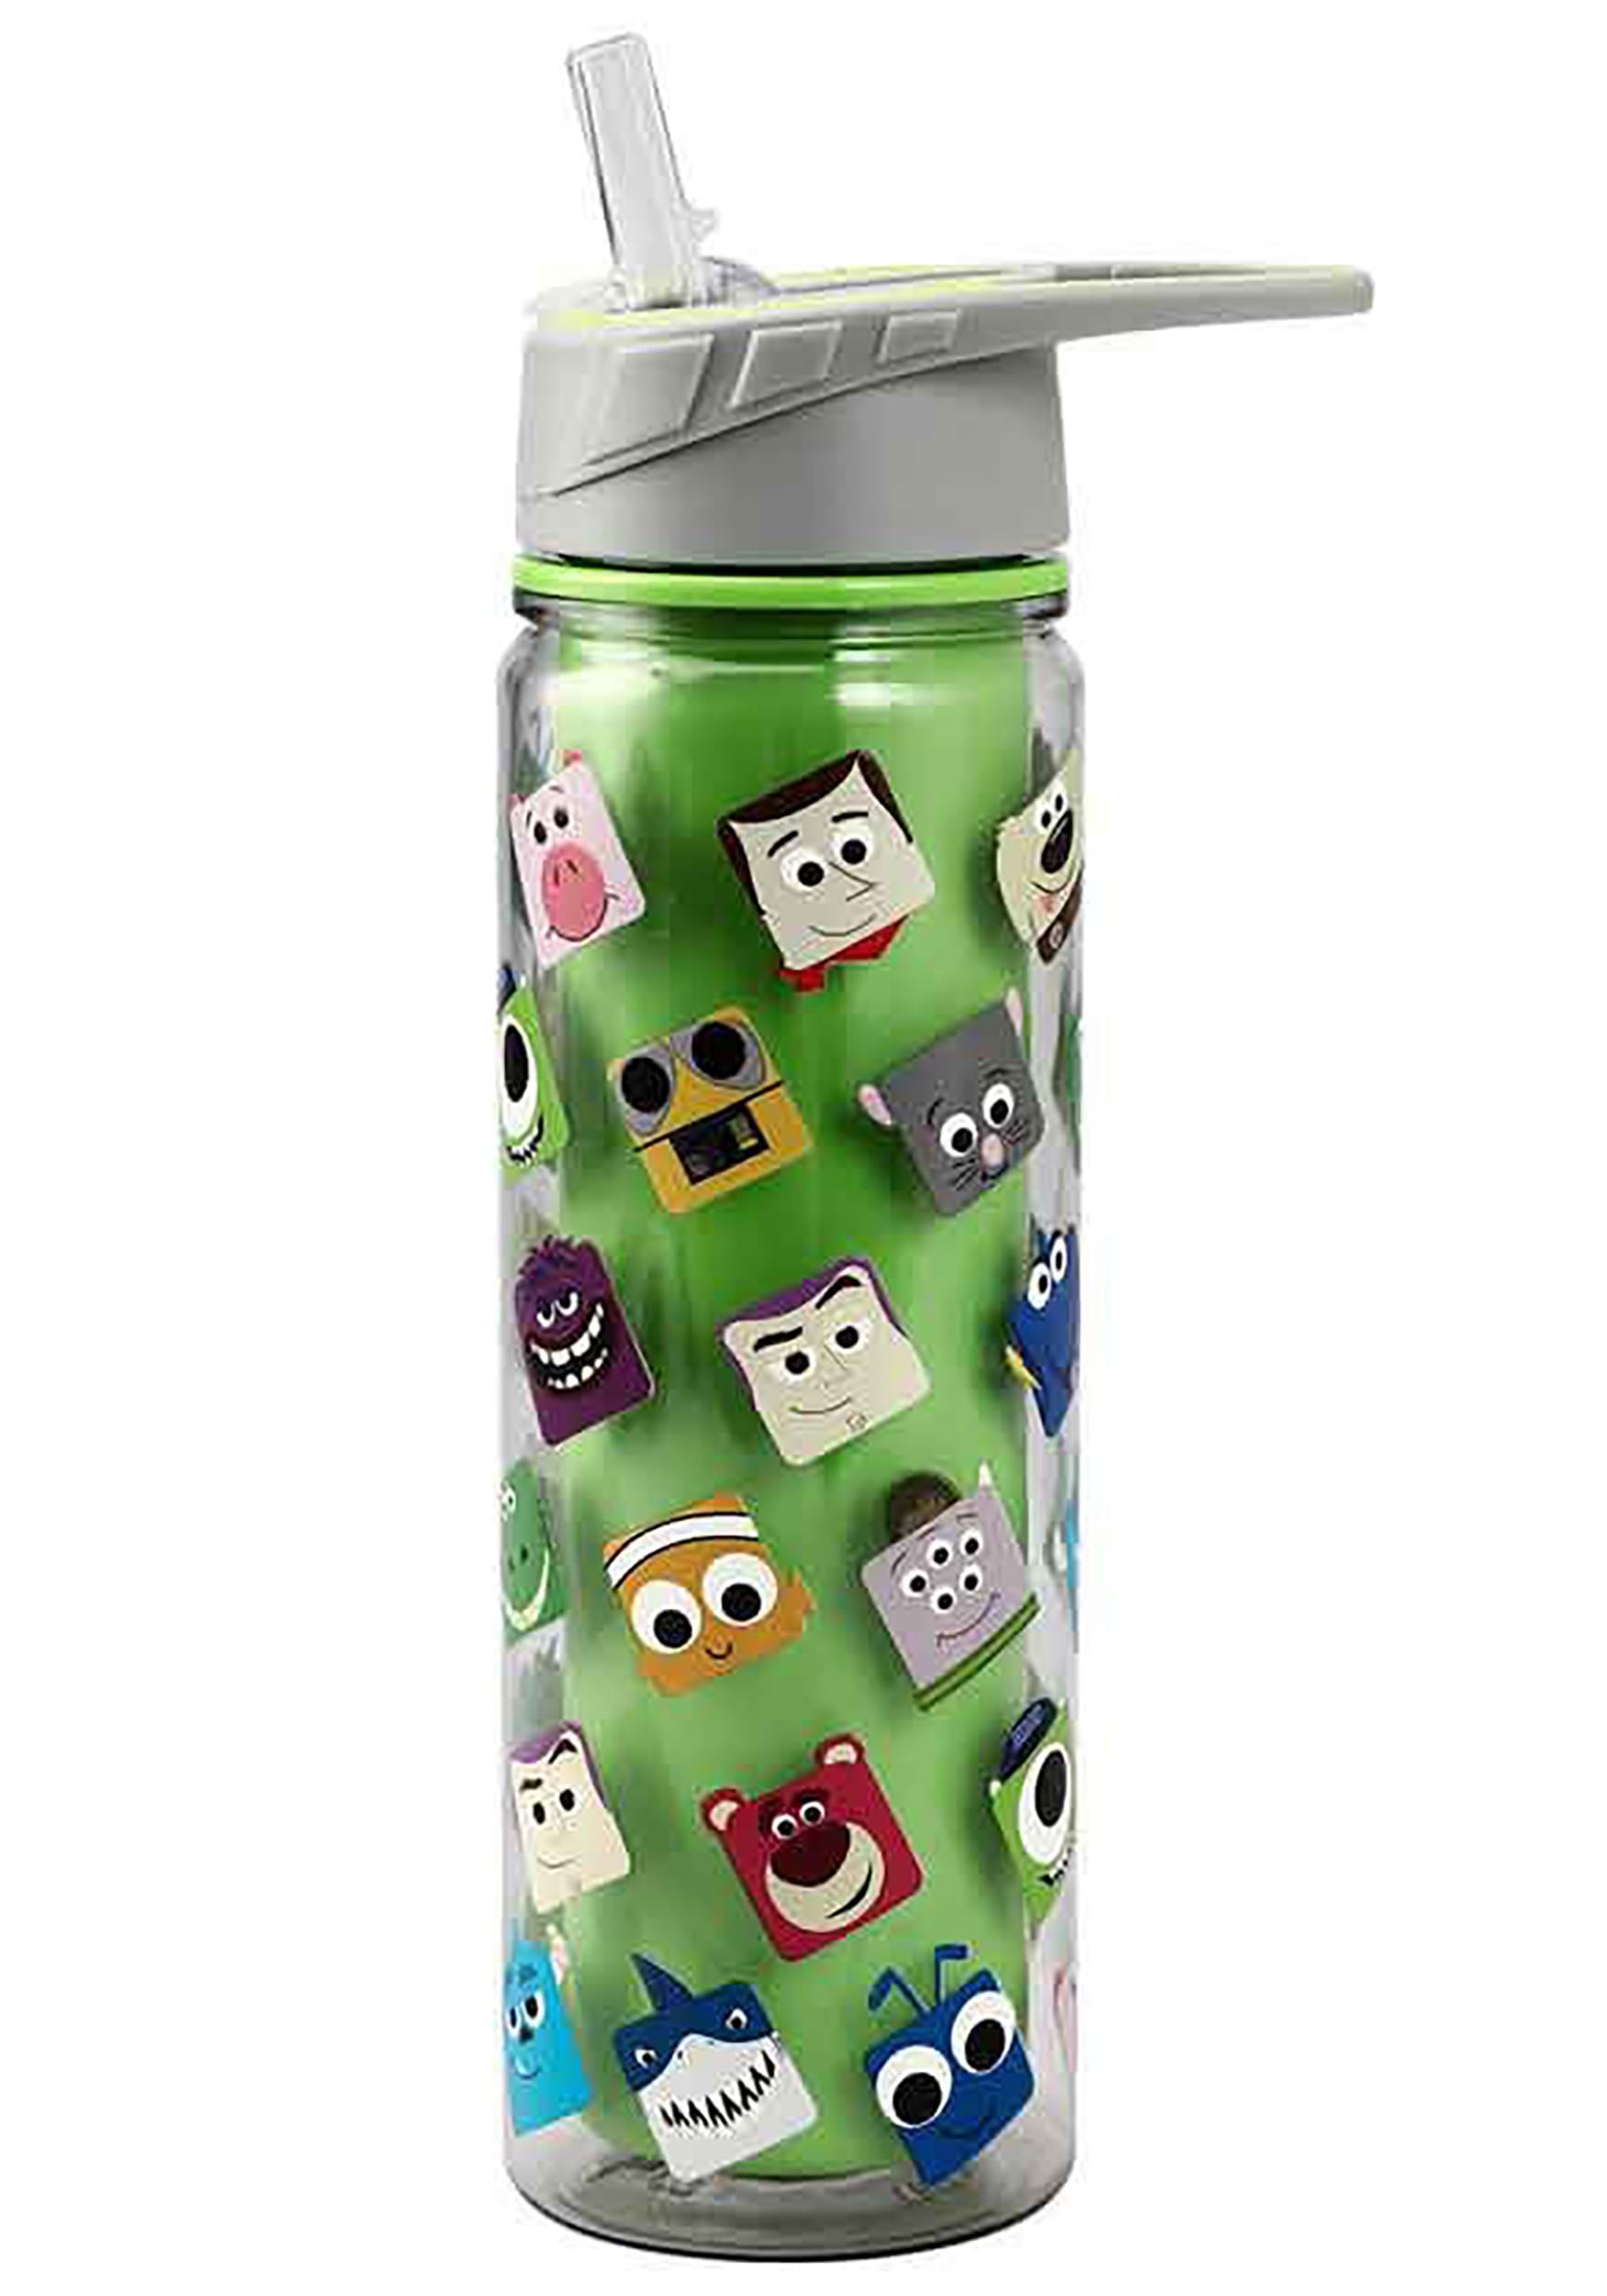 Disney Pixar Toy Story 4 Water Bottle with Built-In Straw